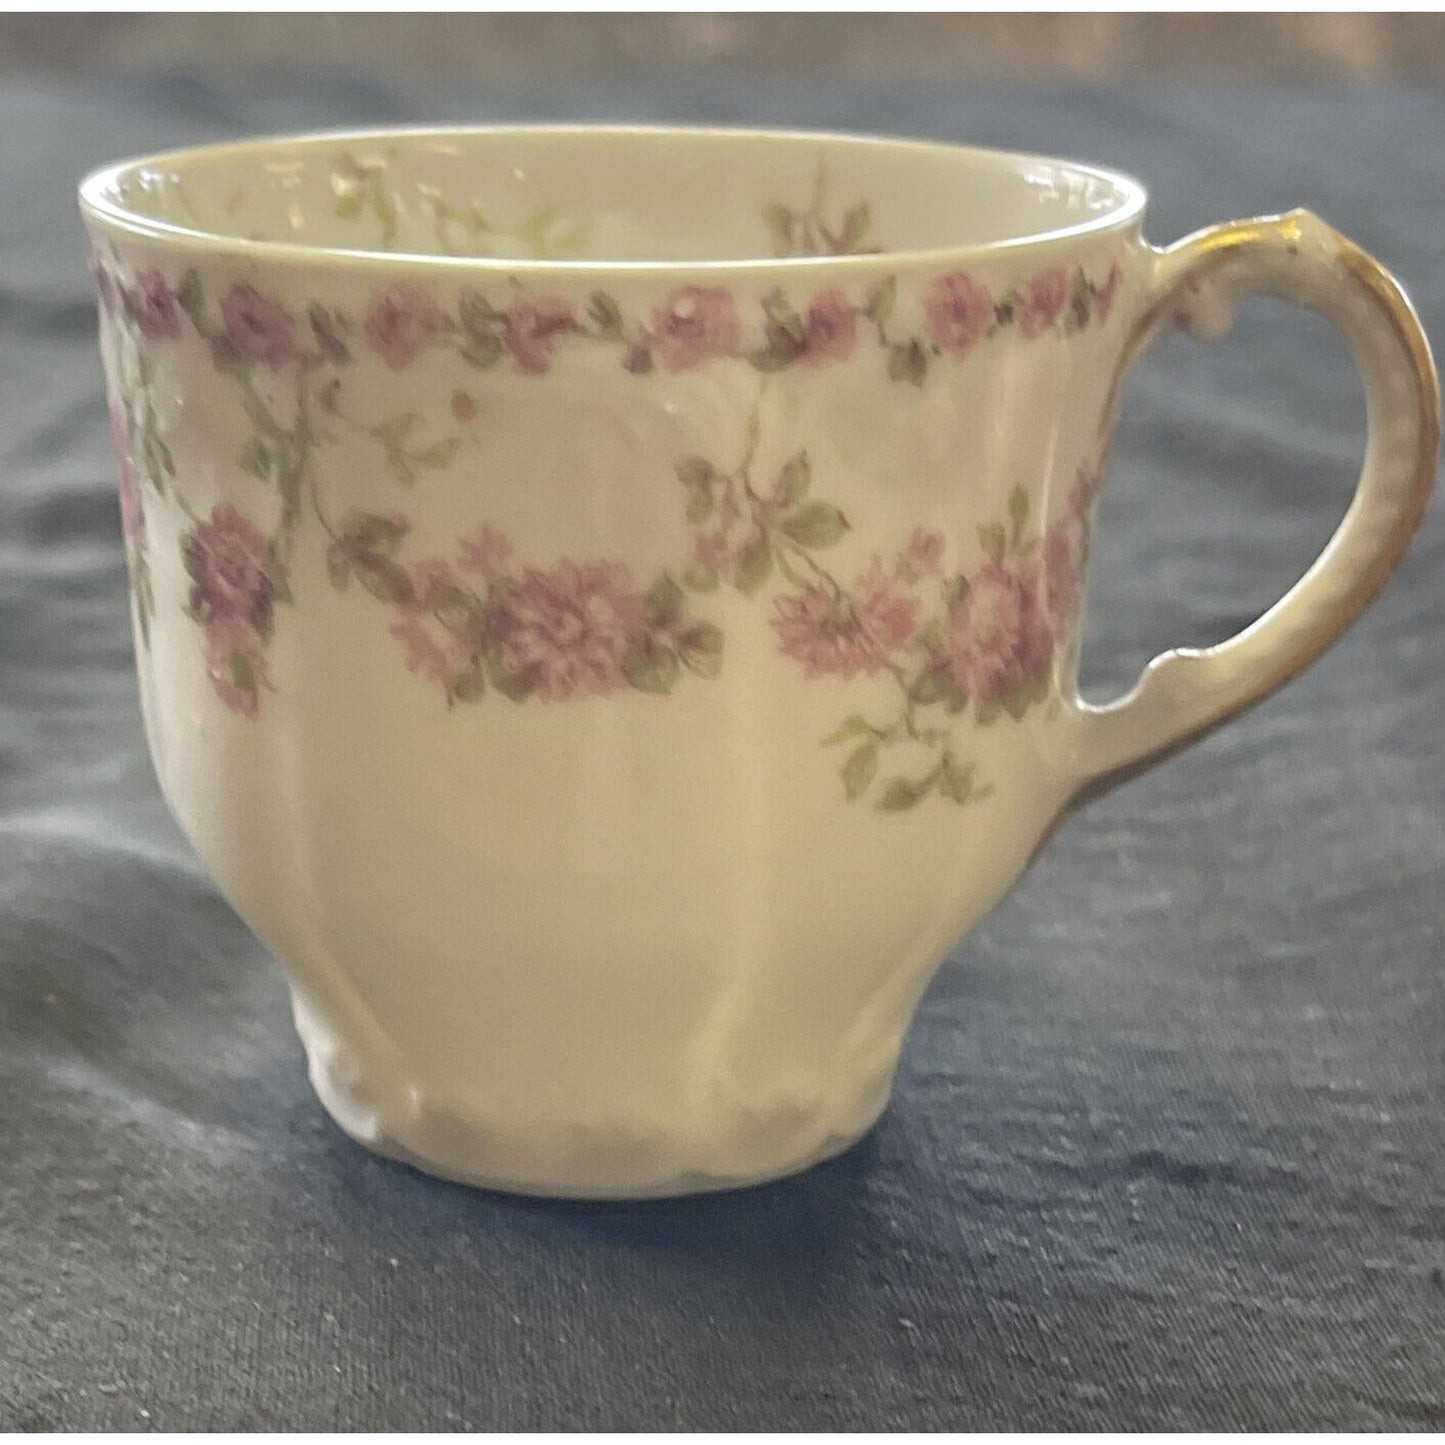 Antique GDM Hand Painted Floral Pattern Demitasse Cup and Saucer circa 1902